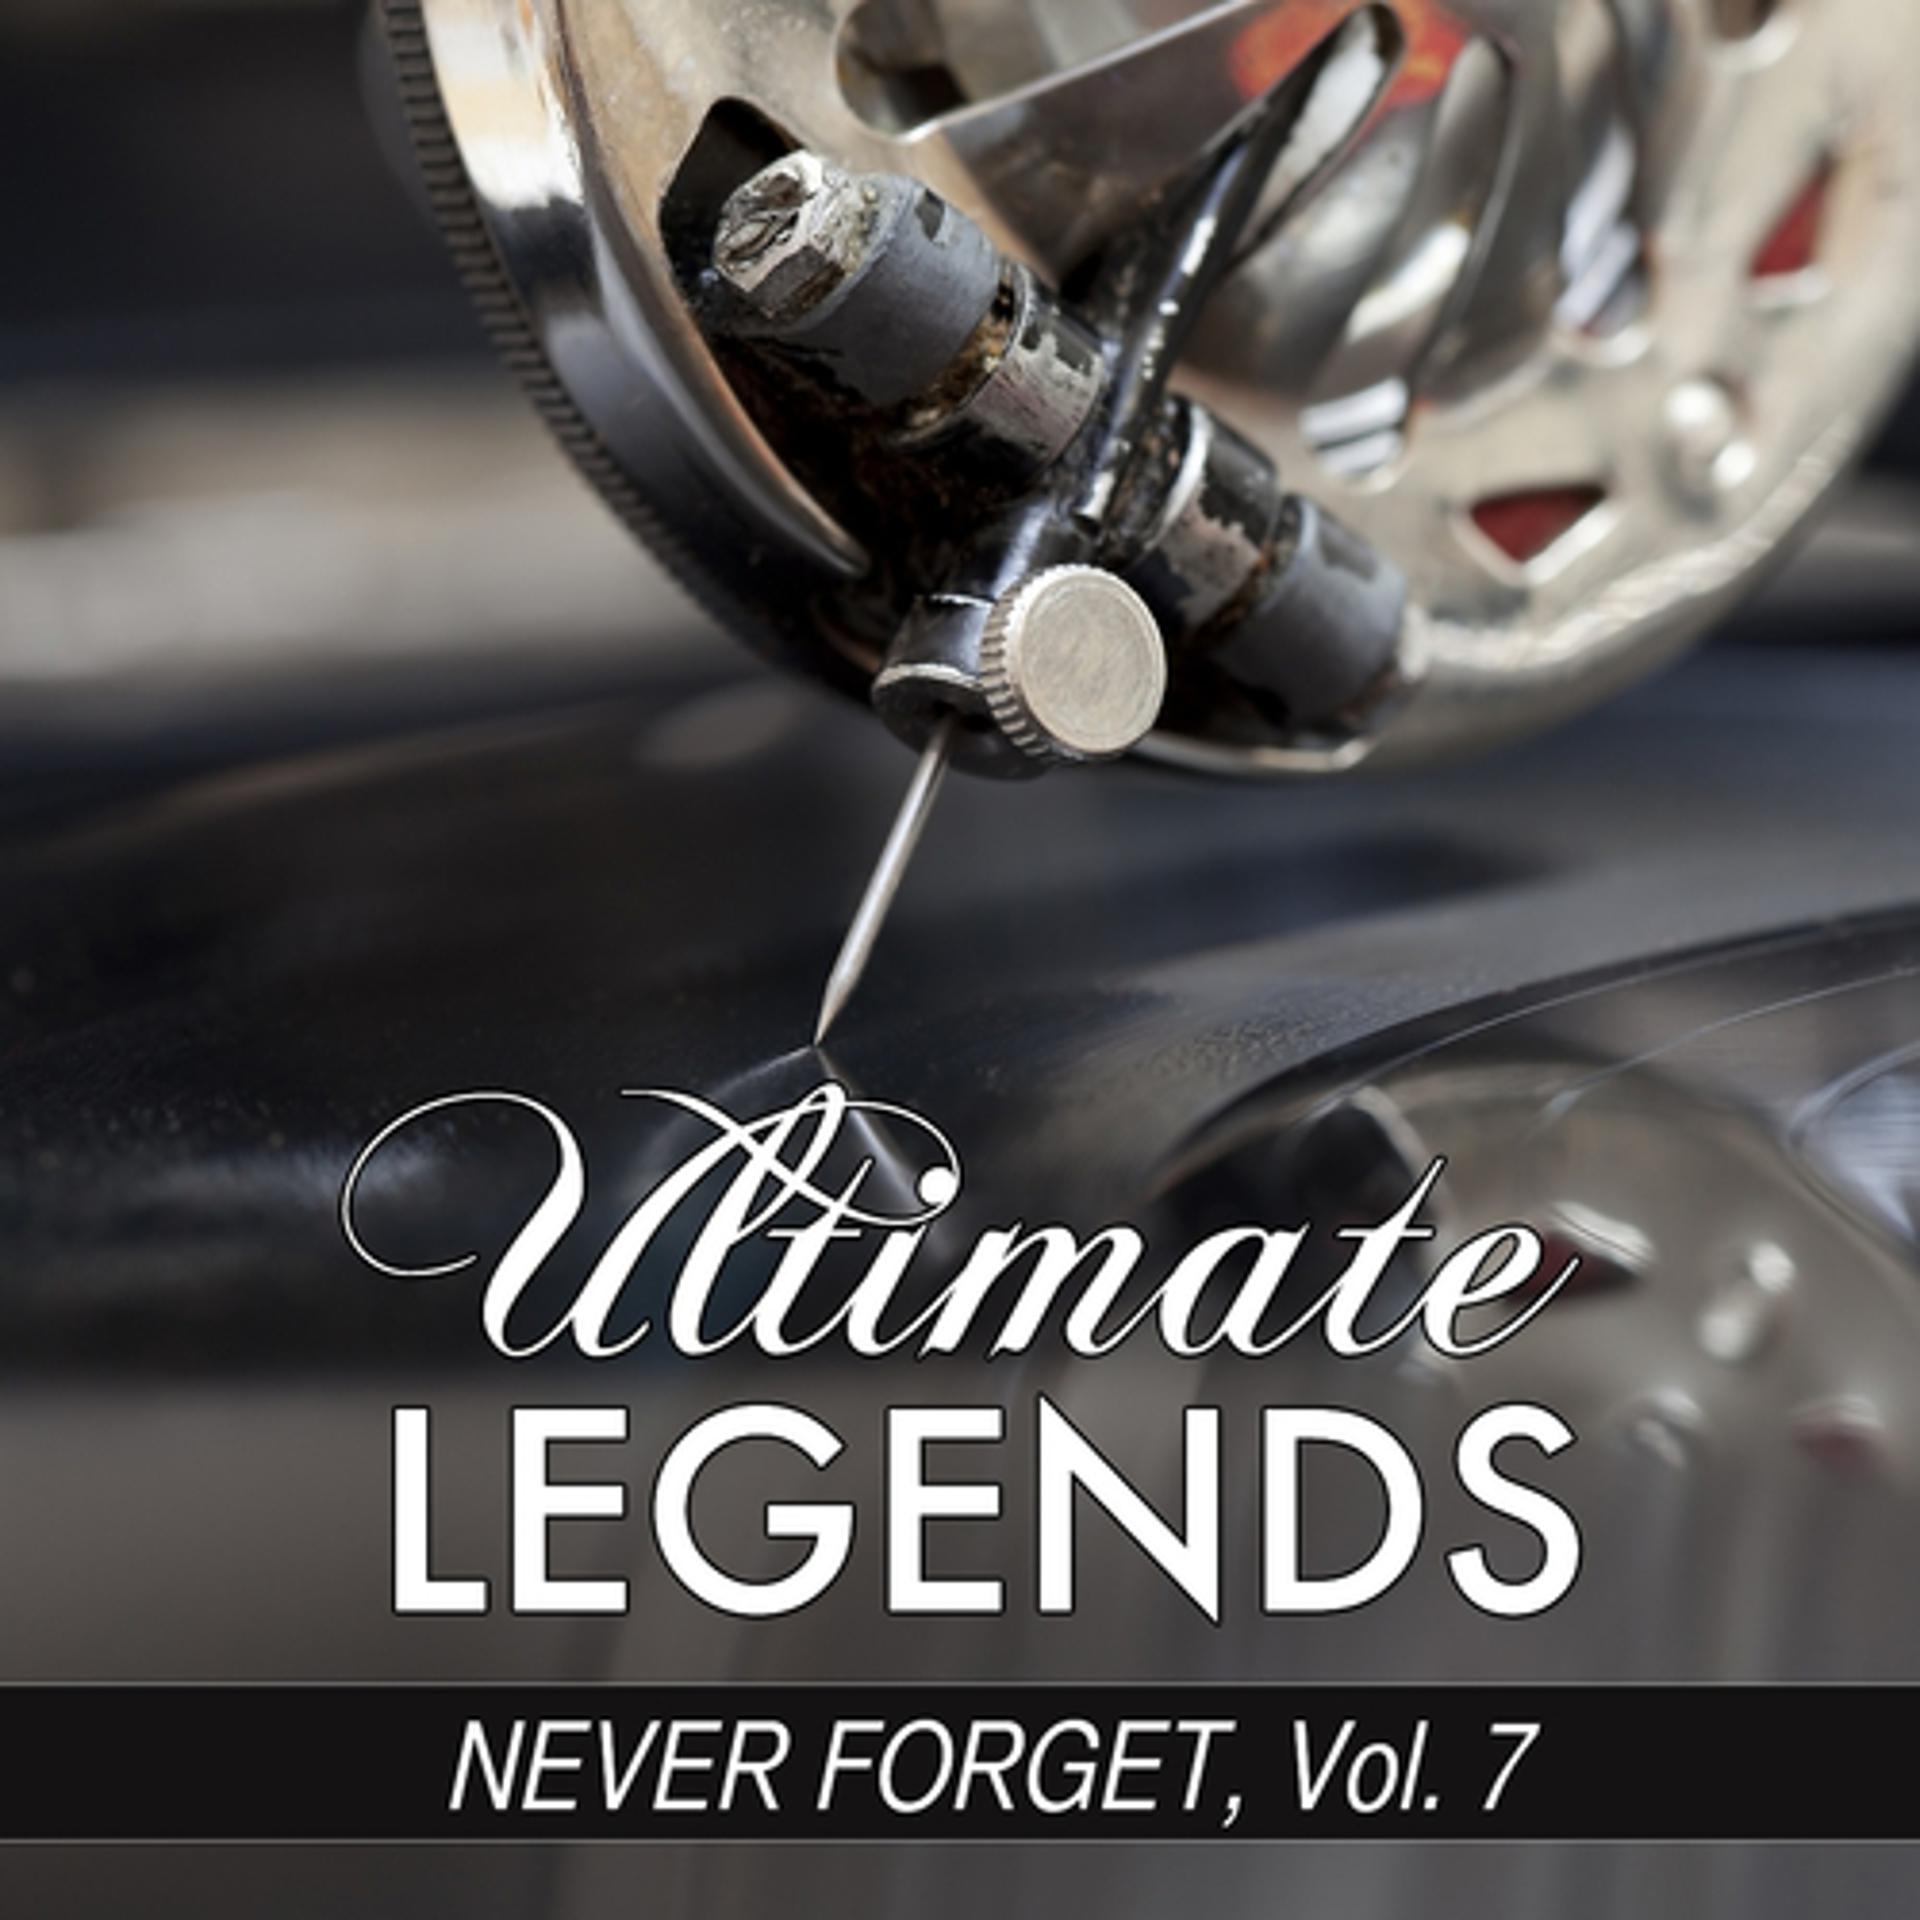 Постер альбома Never Forget, Vol. 7 (Ultimate Legends Presents Never Forget, Vol. 7)